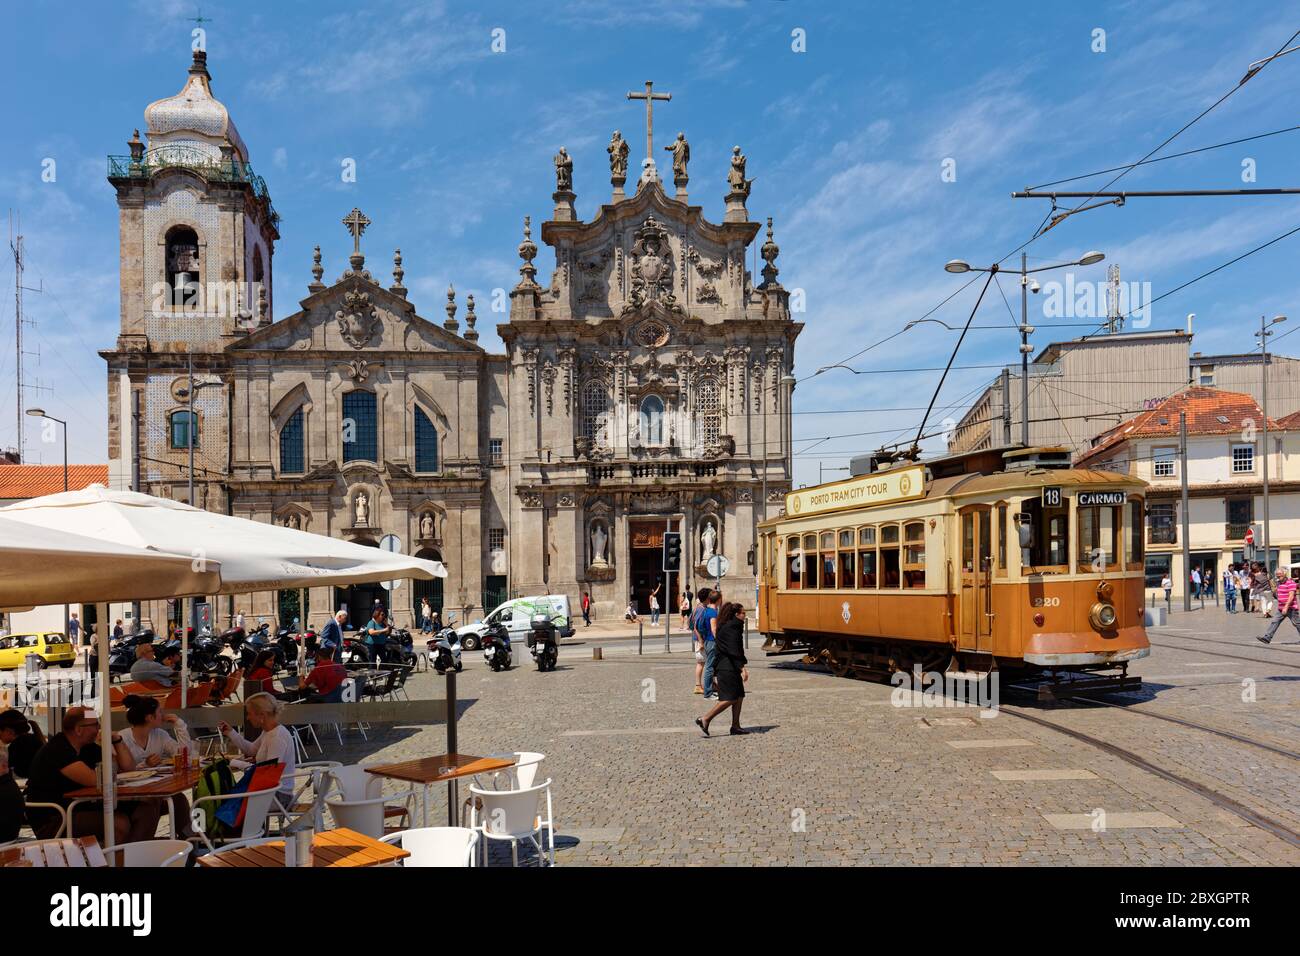 Porto, Portugal - May 8, 2017: People in heritage trams on the Carlos Alberto square. First trams in the city with electric traction was introduced in 1895 Stock Photo